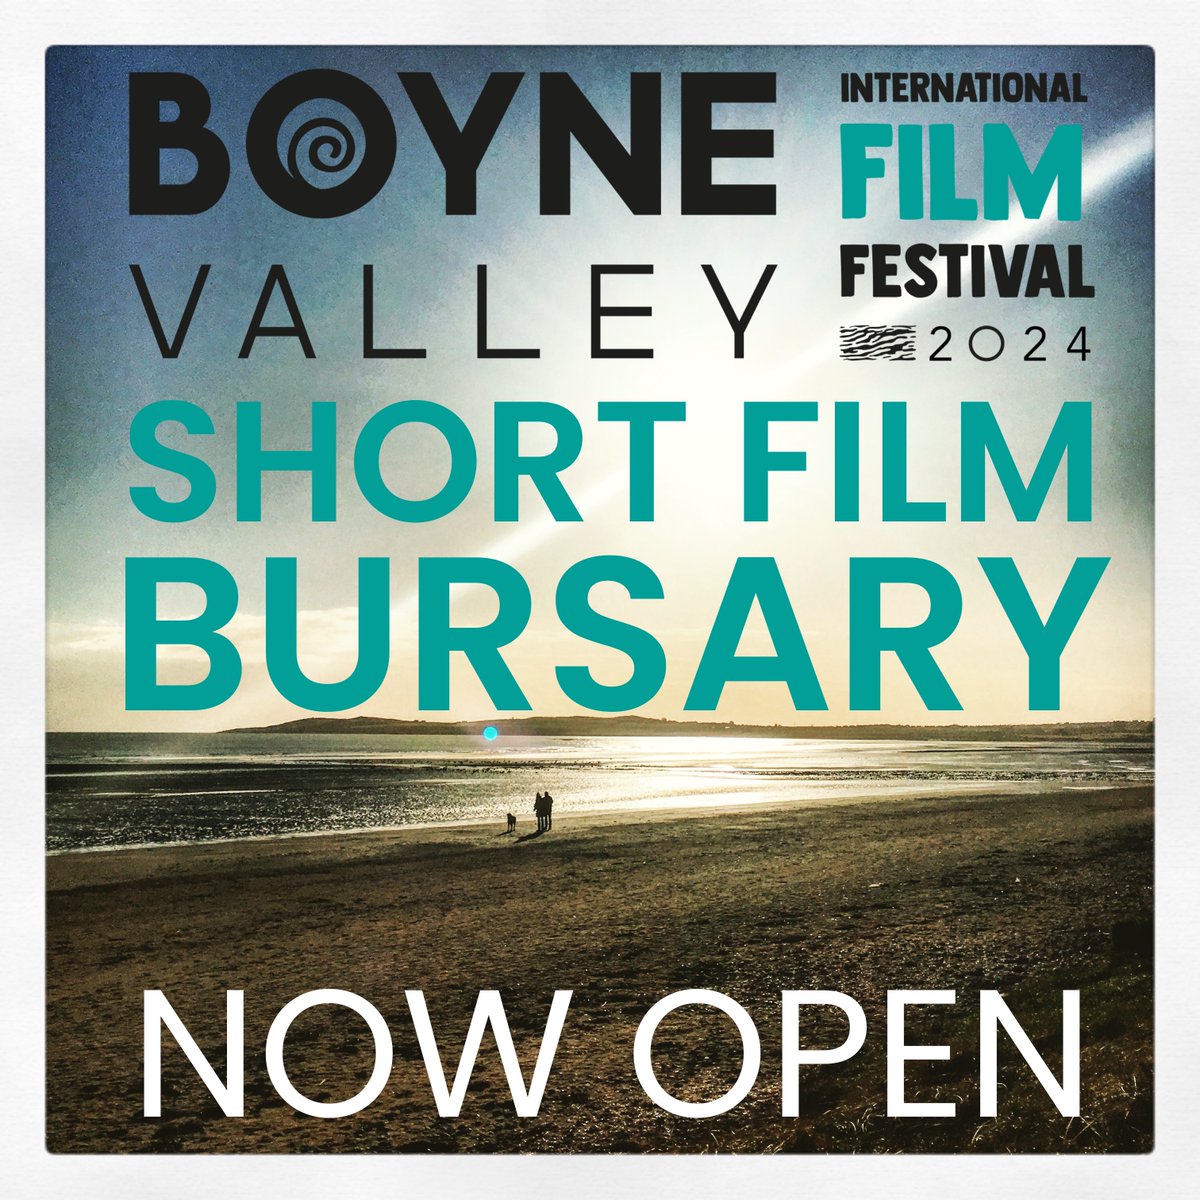 The @BoyneValleyIFF 2024 Short Script Bursary is now open to entries. Entries should be 1 - 2 pages. 3 finalists will be selected to pitch live to judges at the 2024 Festival. Judges this year are @AudreyFilm, @RobkoBurke & @RoBurke25
Visit droicheadartscentre.ticketsolve.com/shows/87364662… for details